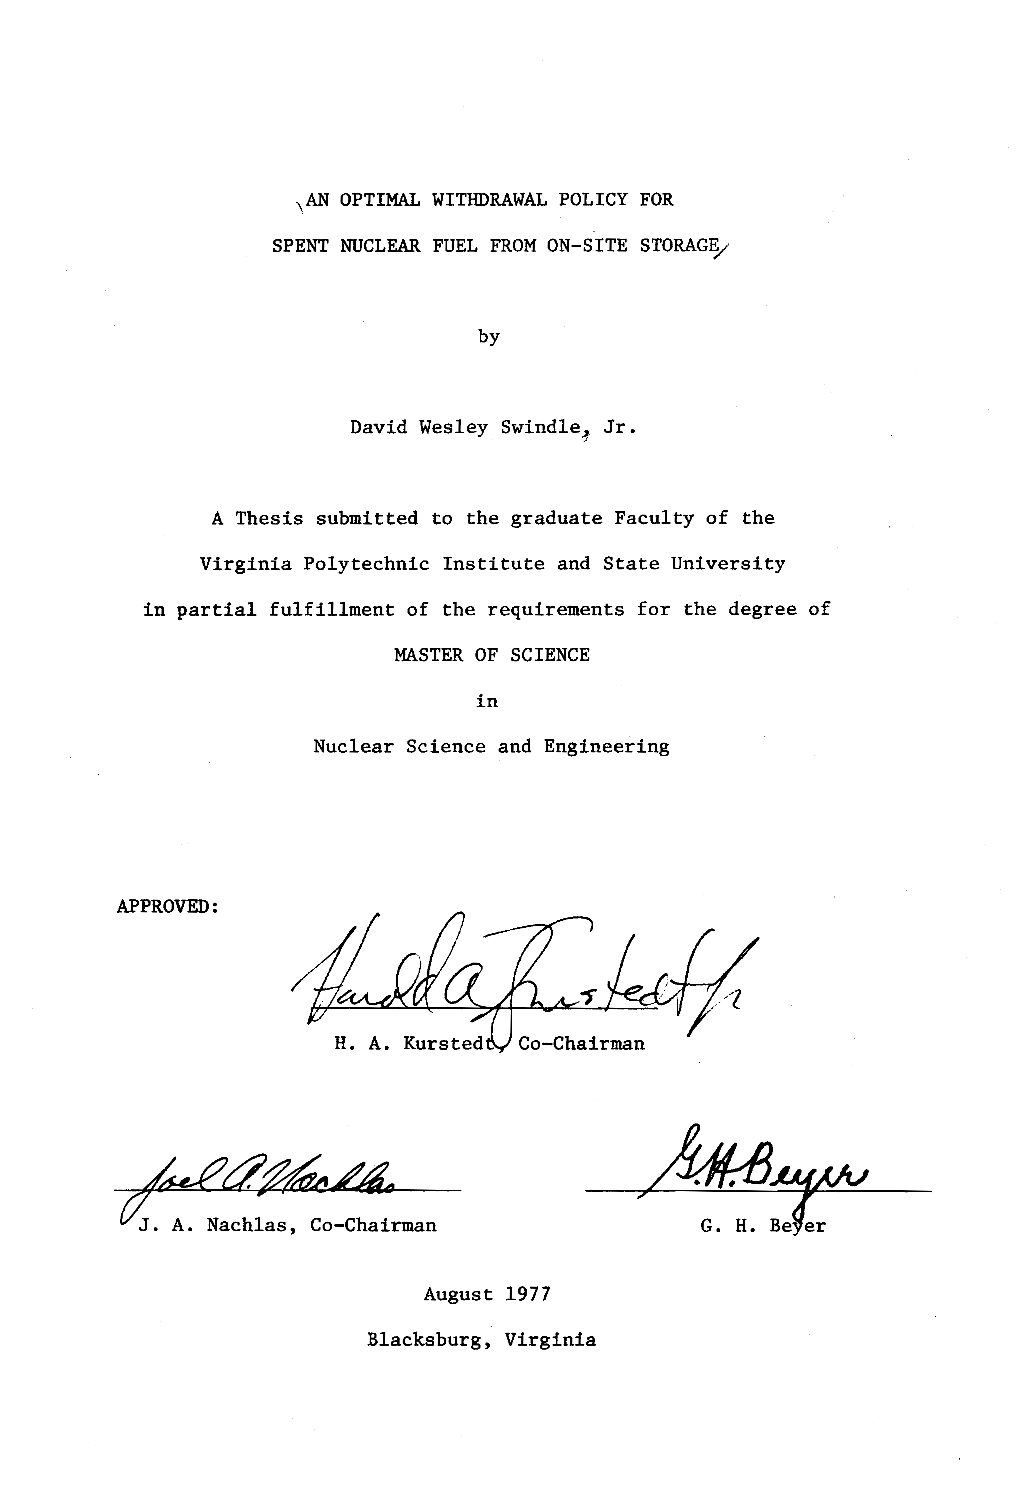 David Wesley Swindle, Jr. a Thesis Submitted to The